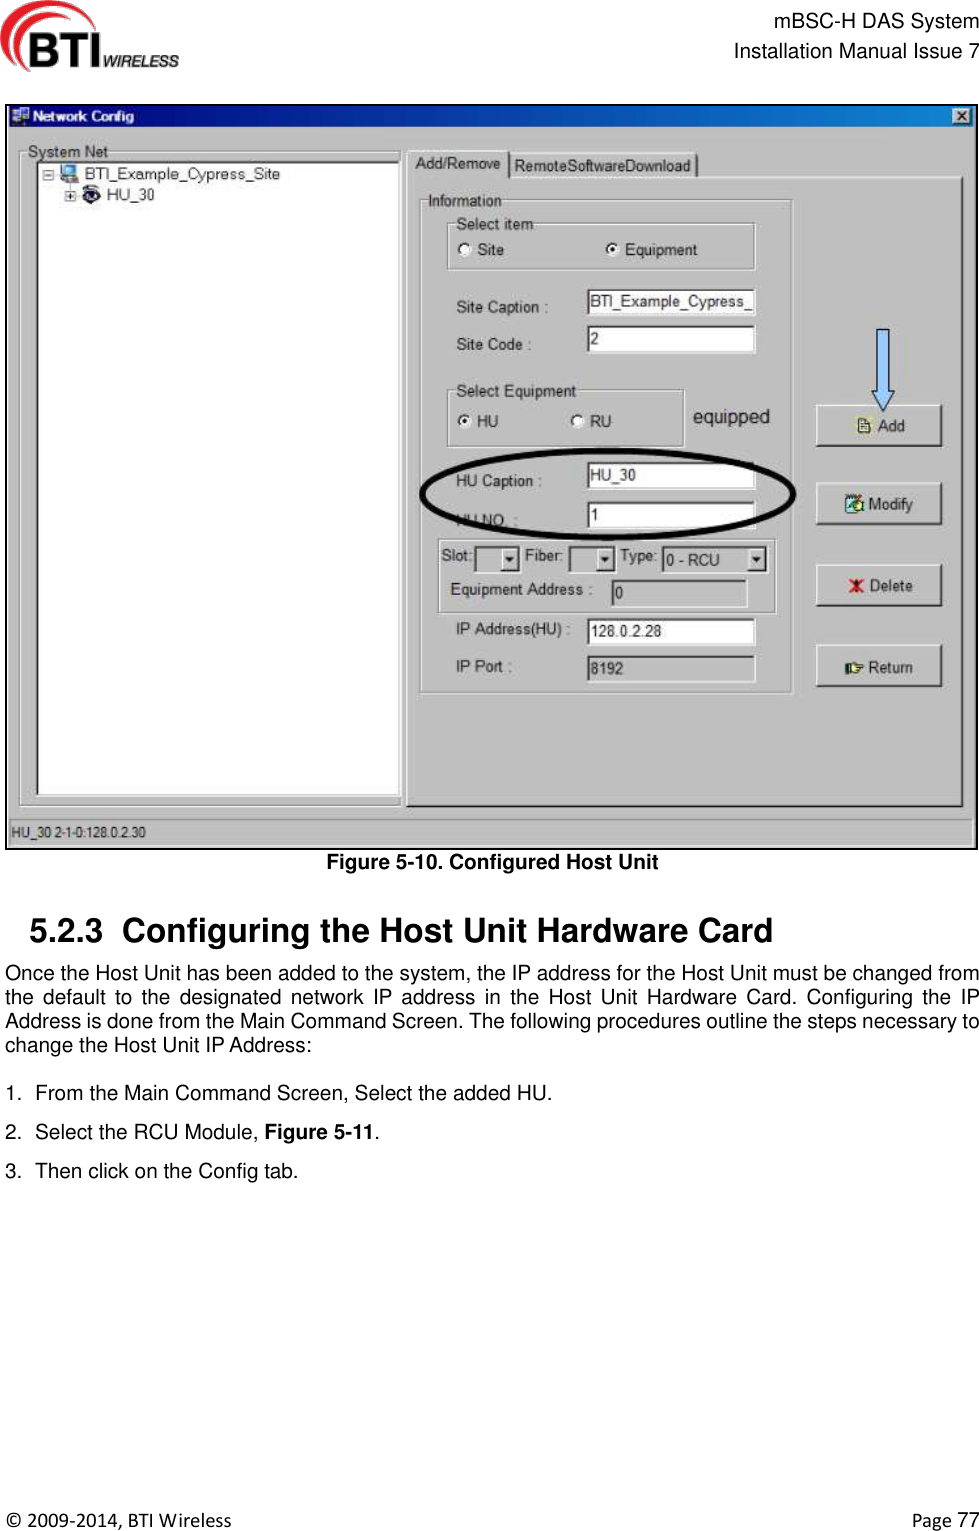                                                   mBSC-H DAS System   Installation Manual Issue 7  ©  2009-2014, BTI Wireless    Page 77  Figure 5-10. Configured Host Unit   5.2.3  Configuring the Host Unit Hardware Card Once the Host Unit has been added to the system, the IP address for the Host Unit must be changed from the  default  to  the  designated  network  IP address  in  the  Host  Unit  Hardware  Card.  Configuring  the  IP Address is done from the Main Command Screen. The following procedures outline the steps necessary to change the Host Unit IP Address:  1.  From the Main Command Screen, Select the added HU. 2.  Select the RCU Module, Figure 5-11. 3.  Then click on the Config tab. 